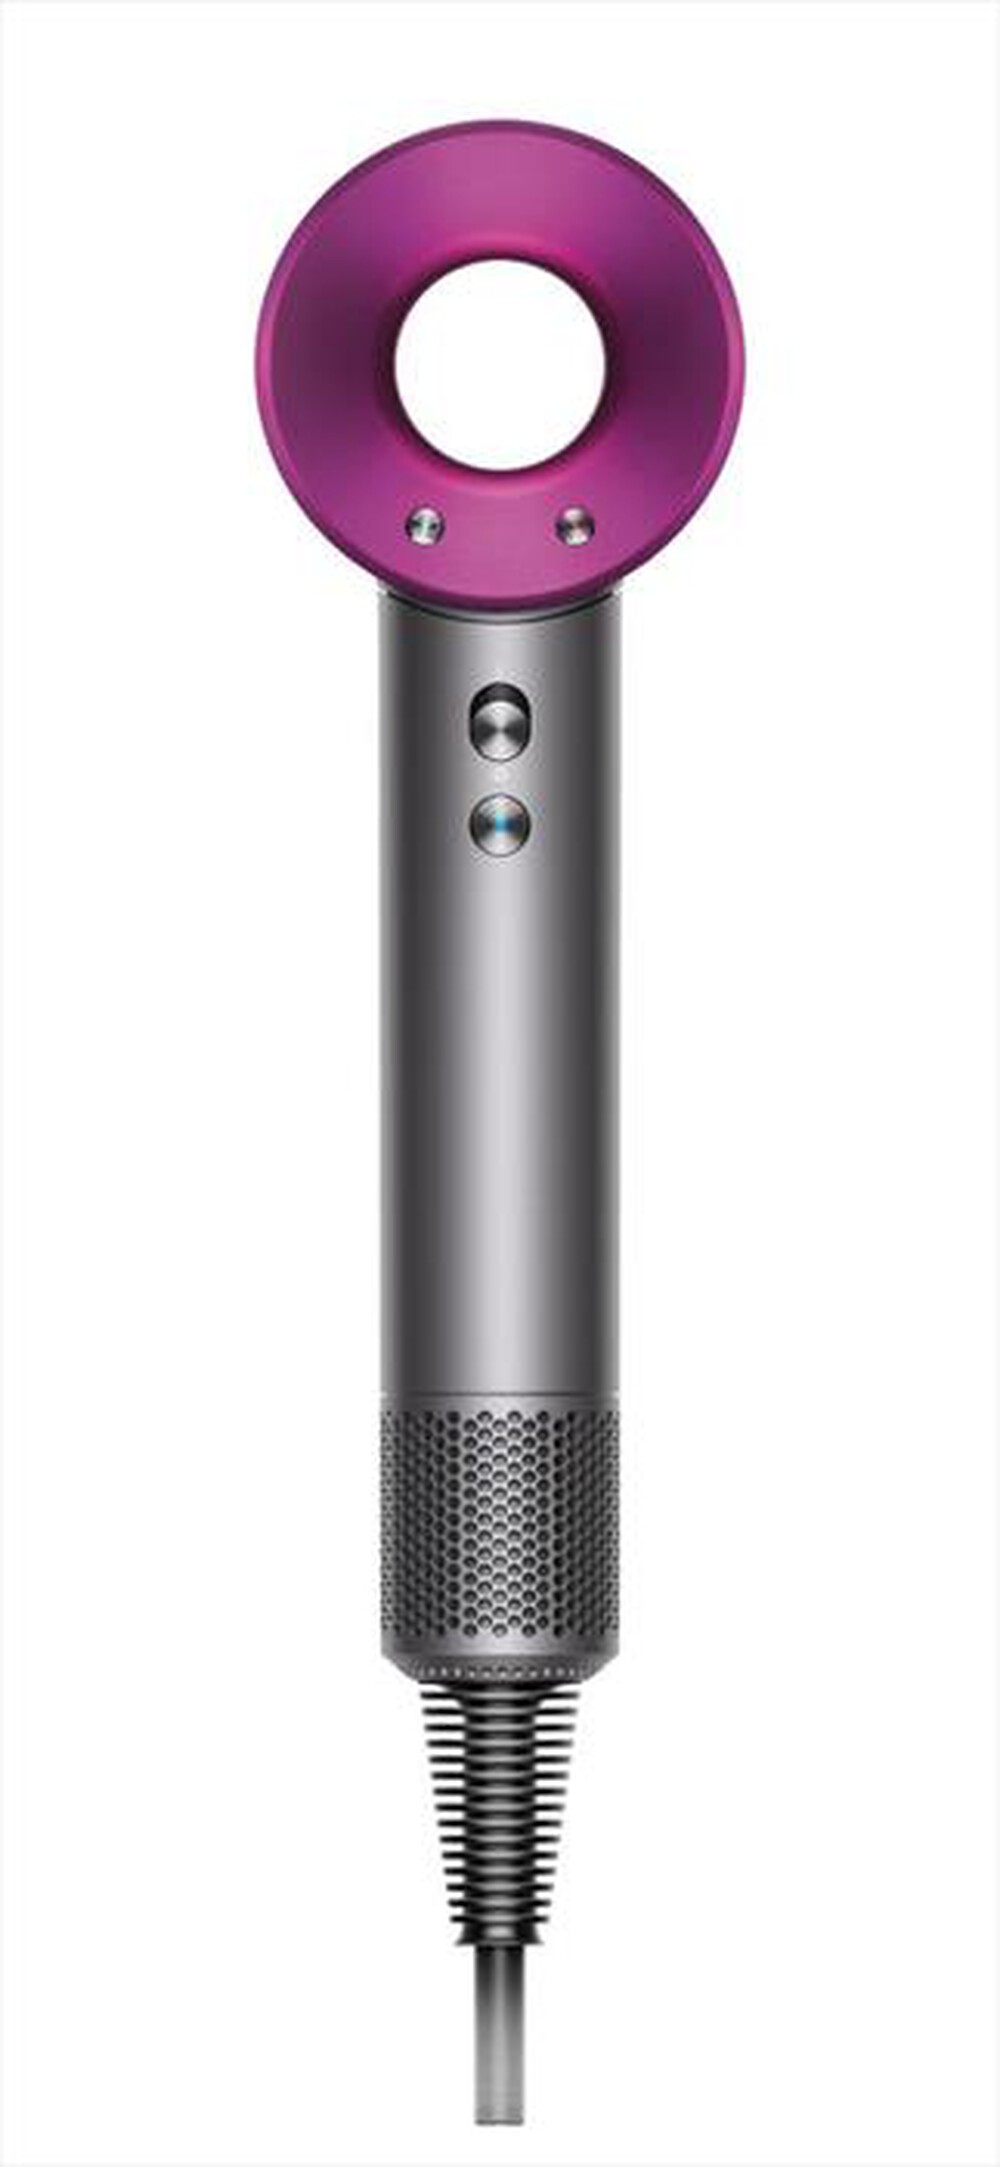 "DYSON - SUPERSONIC GENTLE AIR"